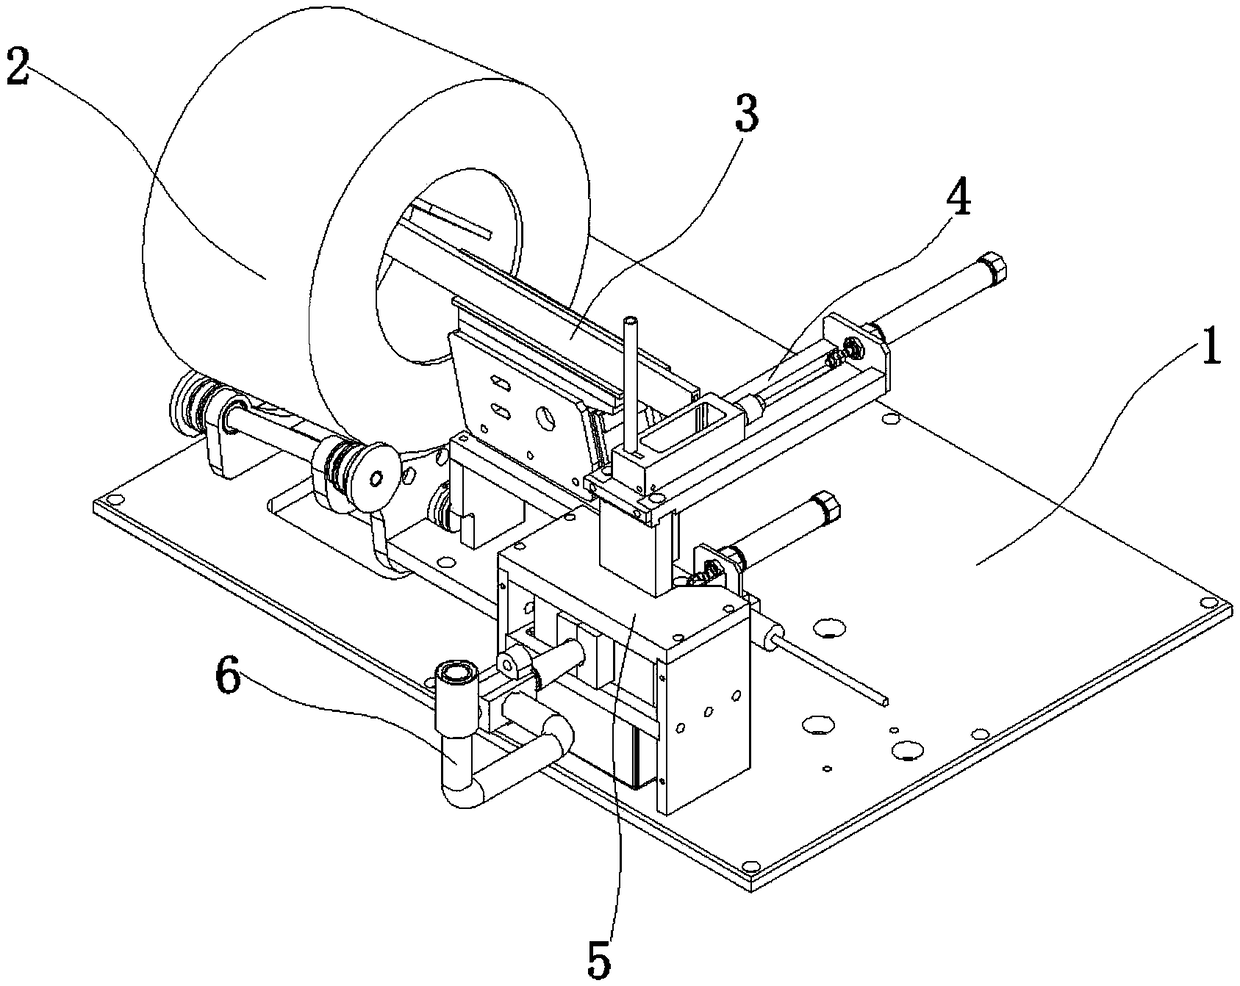 A semi-automatic o-ring assembly and oiling equipment